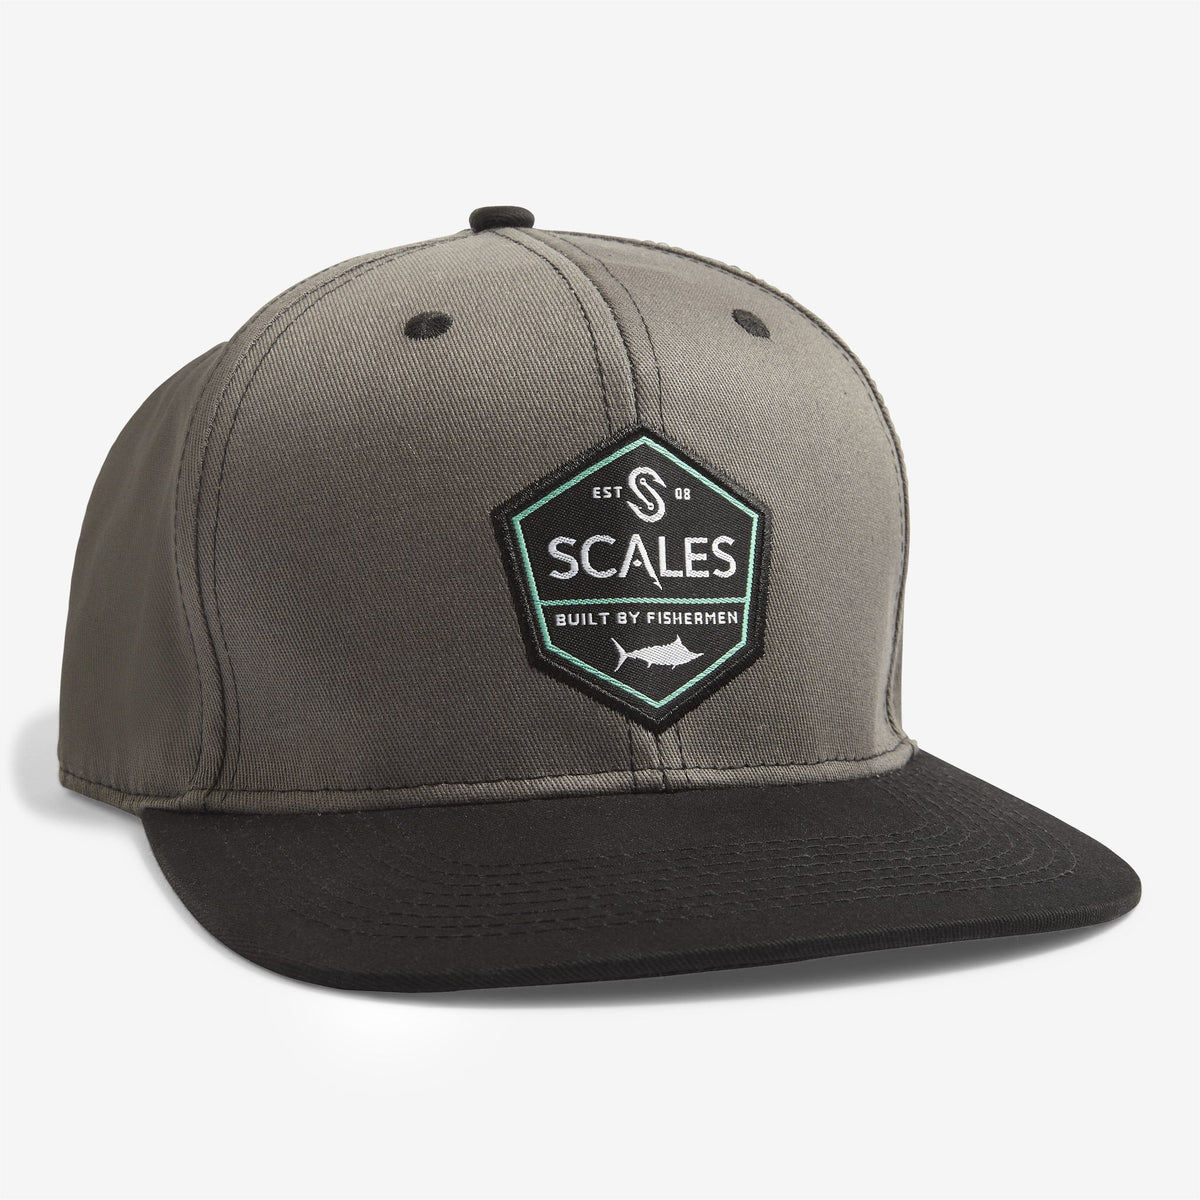 SCALES Built By Fishermen Snapback